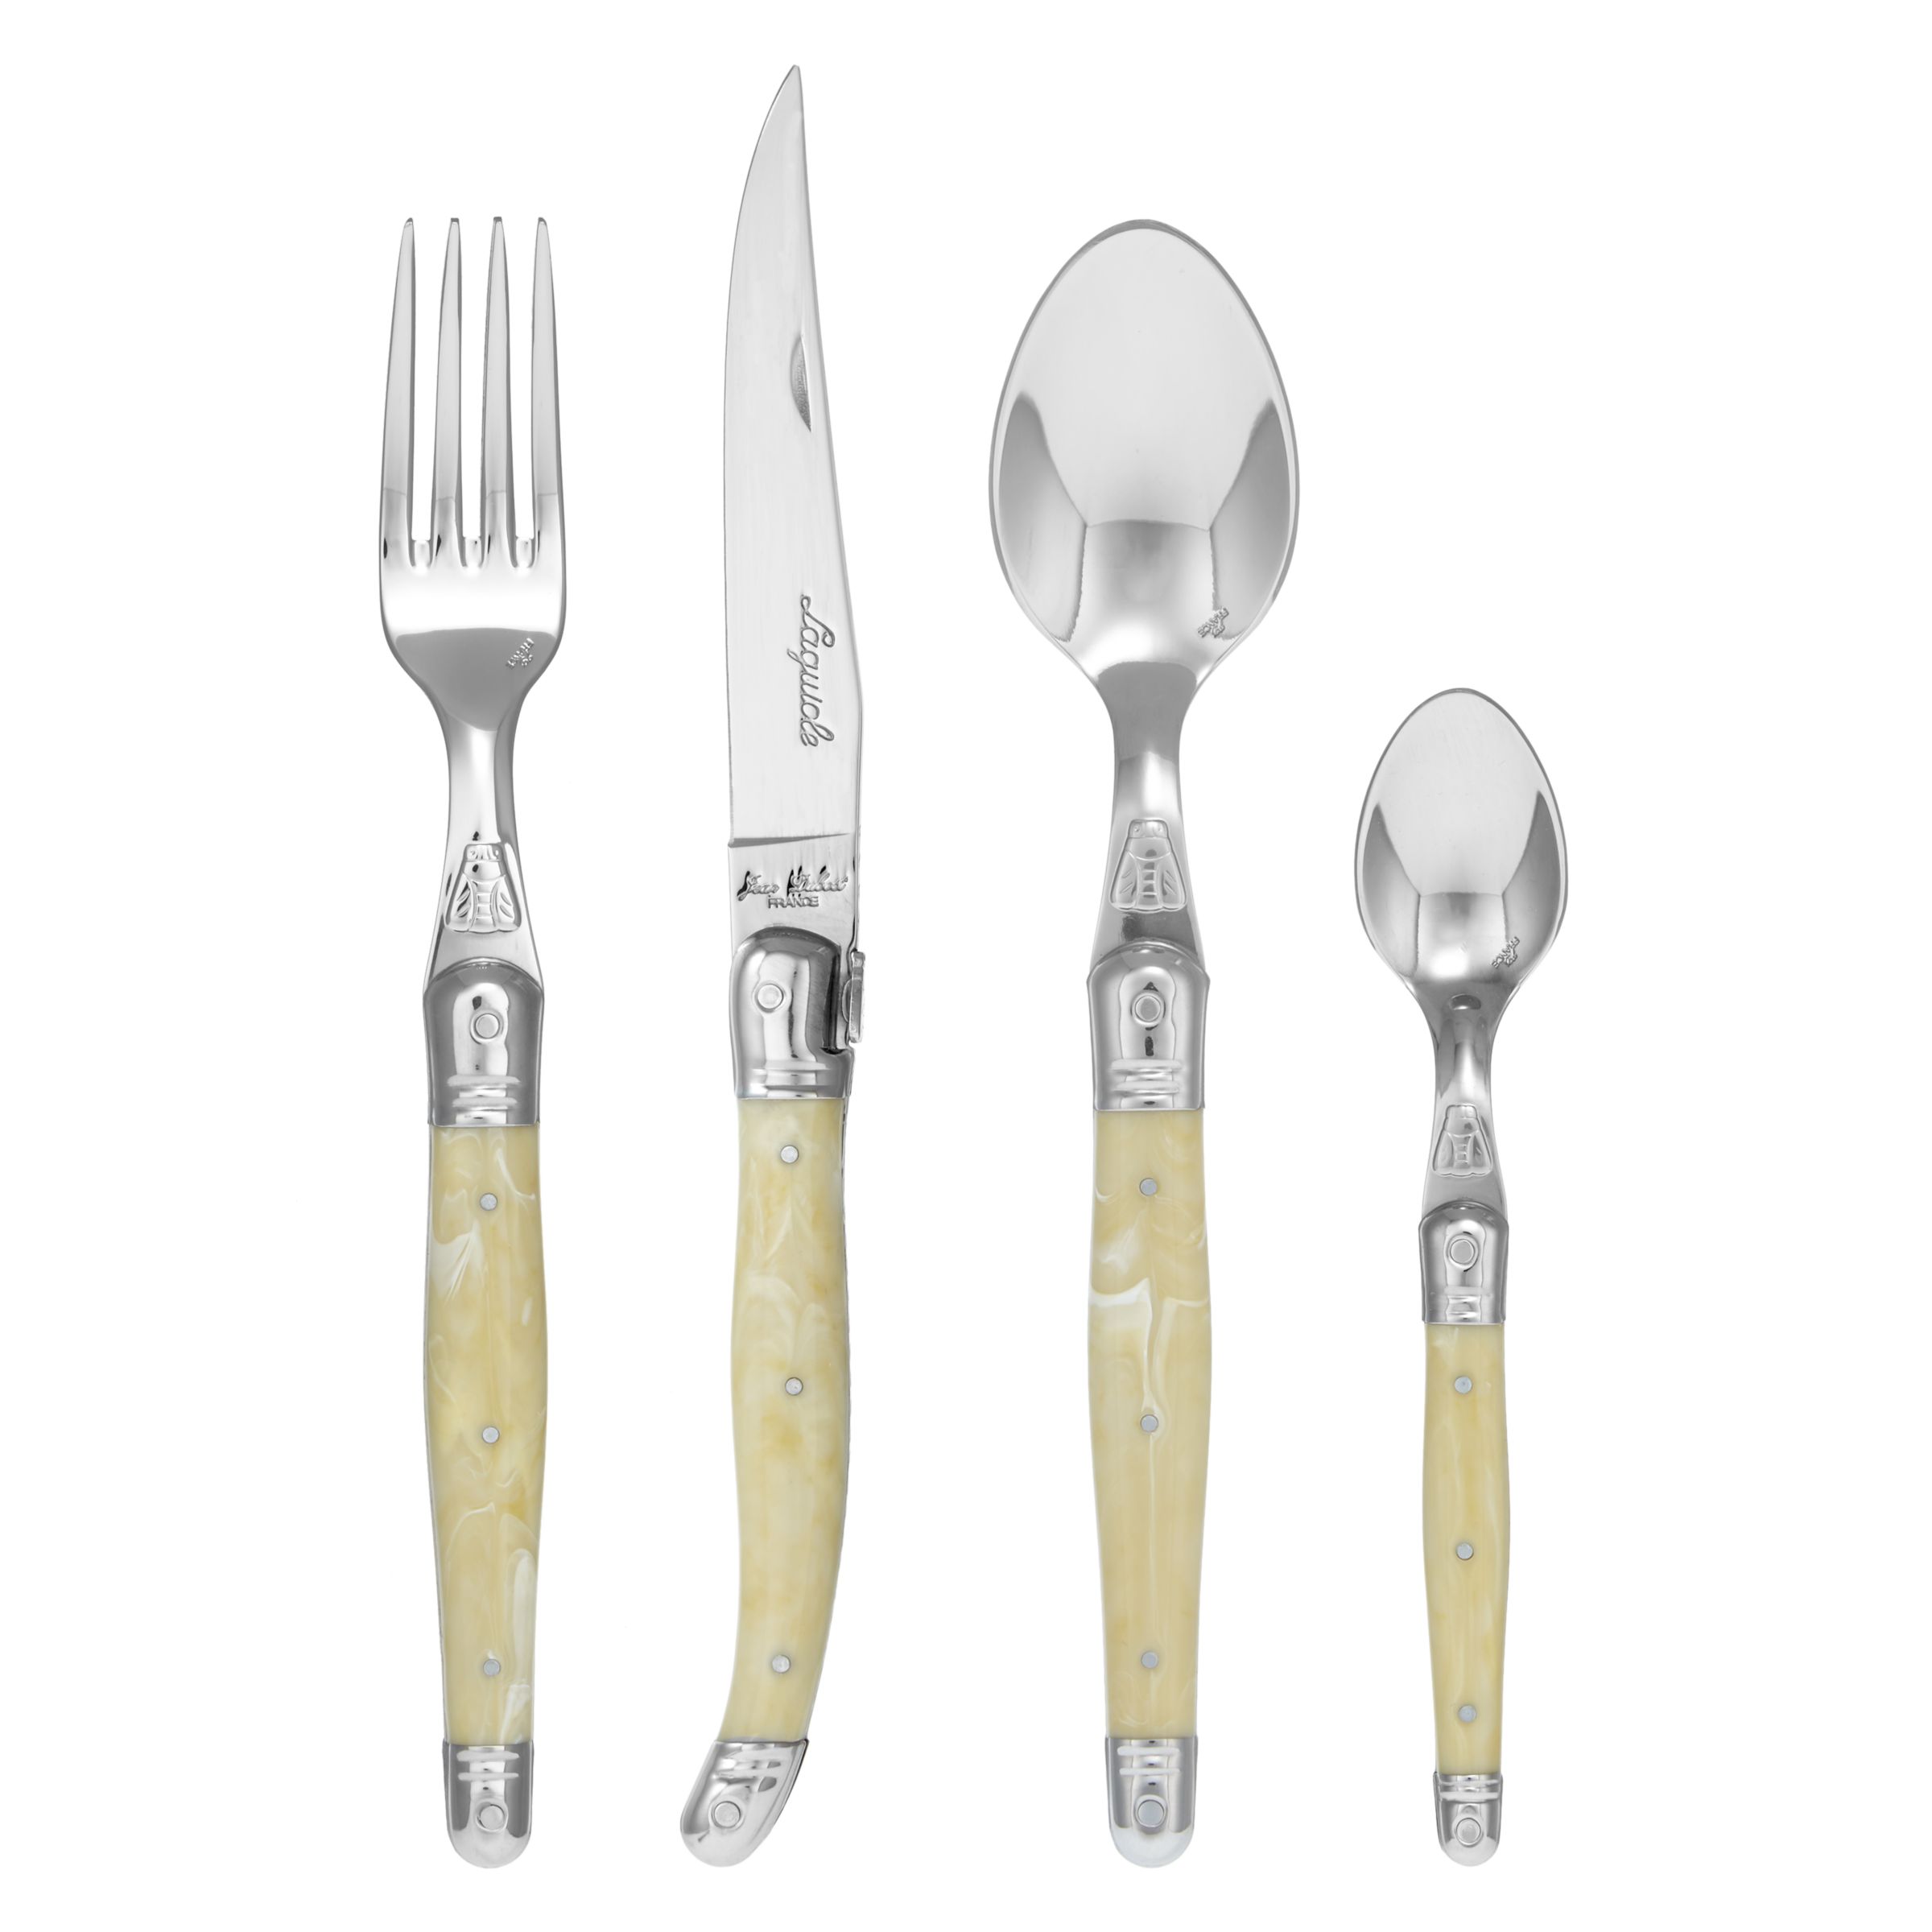 Laguiole Boxed Cutlery Set, Stainless Steel, 32-Piece at John Lewis